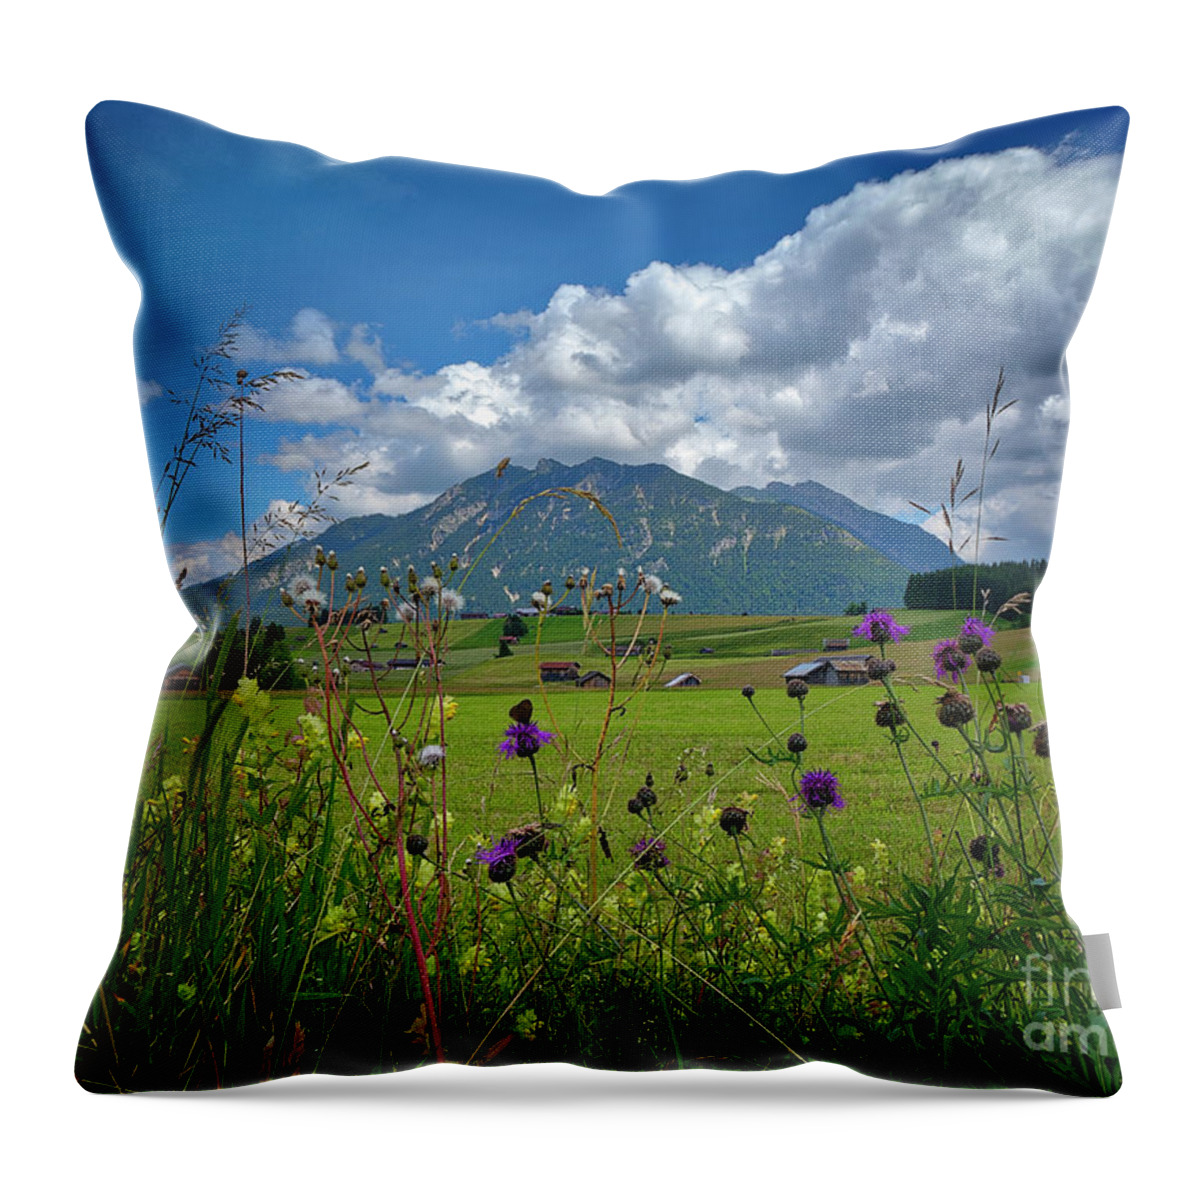 Nag005006 Throw Pillow featuring the photograph Alpine Beauty by Edmund Nagele FRPS